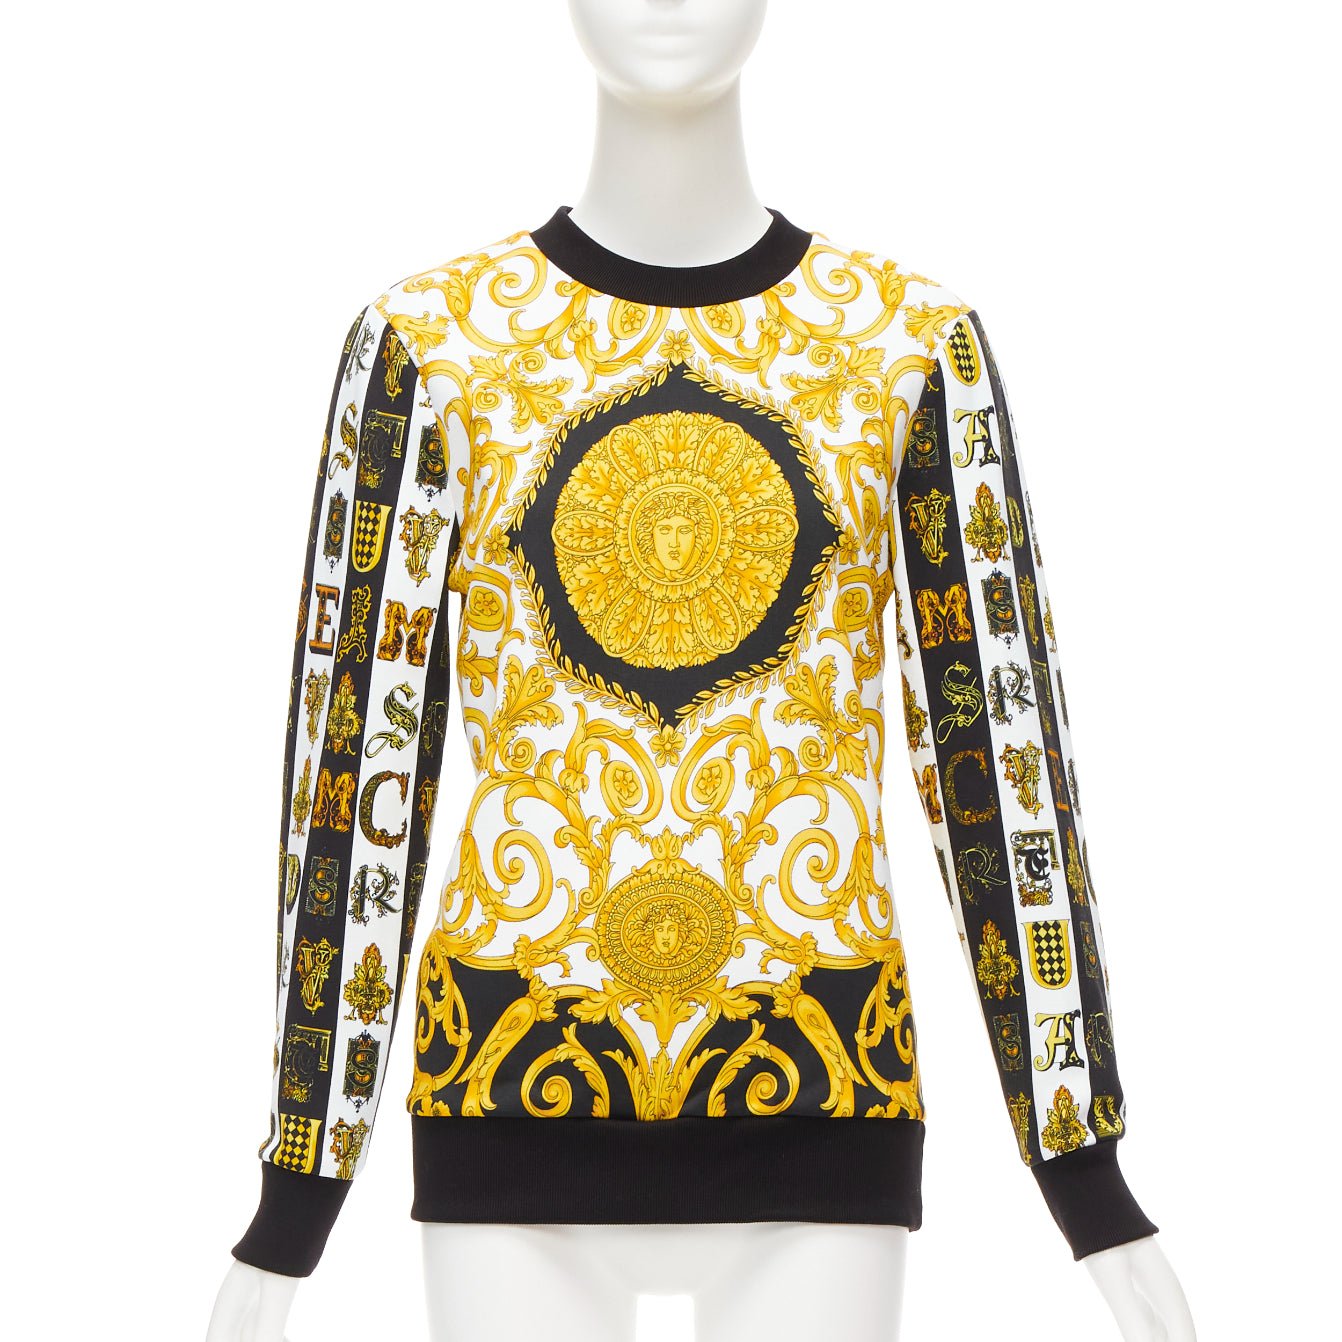 100% Authenticity Guaranteed Versace Gold Cotton Top on Sale. Available at  JHROP jhrop_official